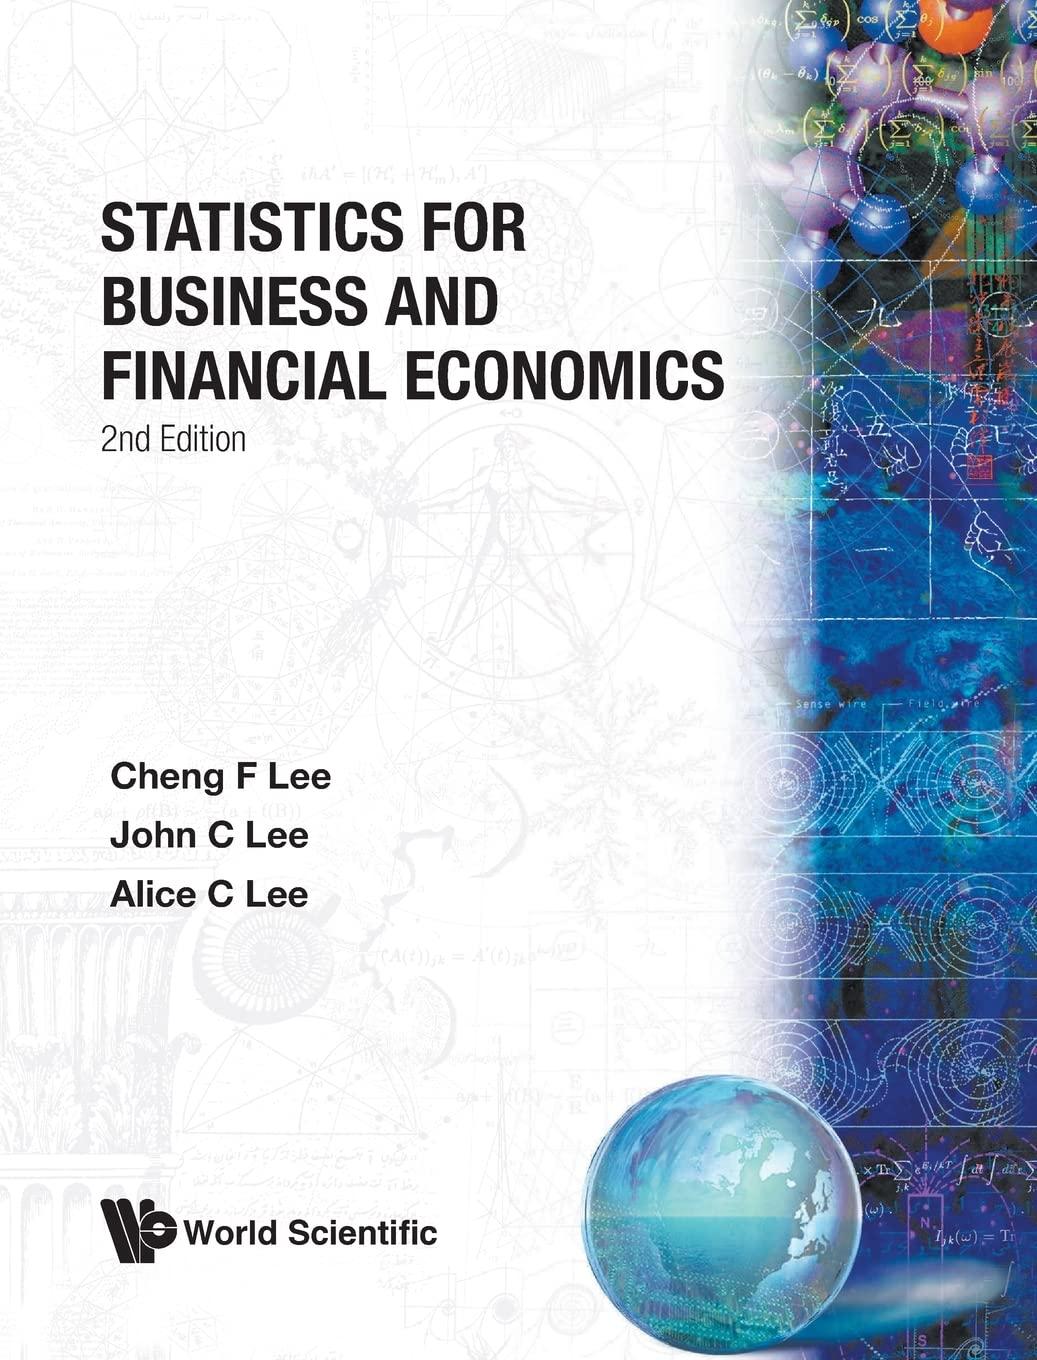 statistics for business and financial economics 2nd edition cheng few lee, john c lee, alice c lee